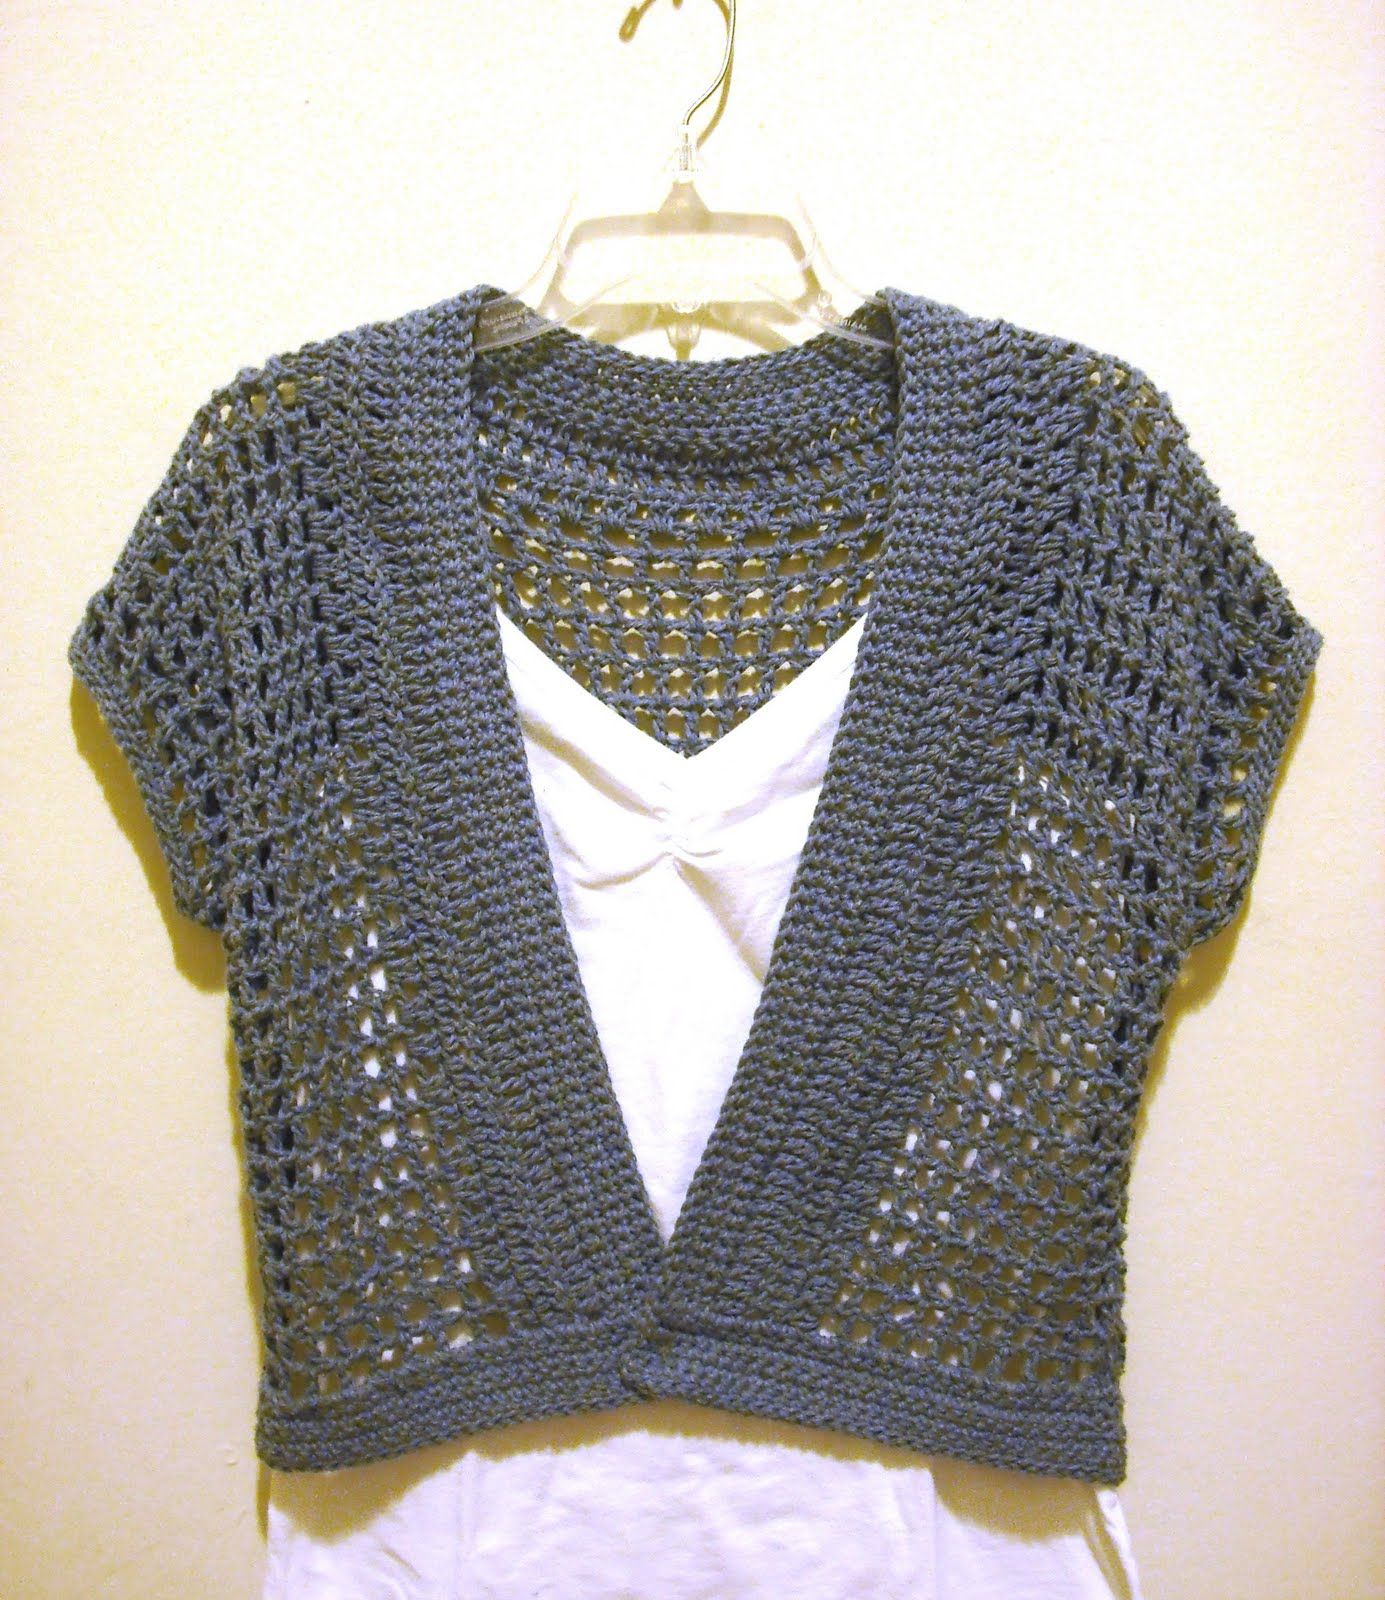 how to crochet a shrug sweater